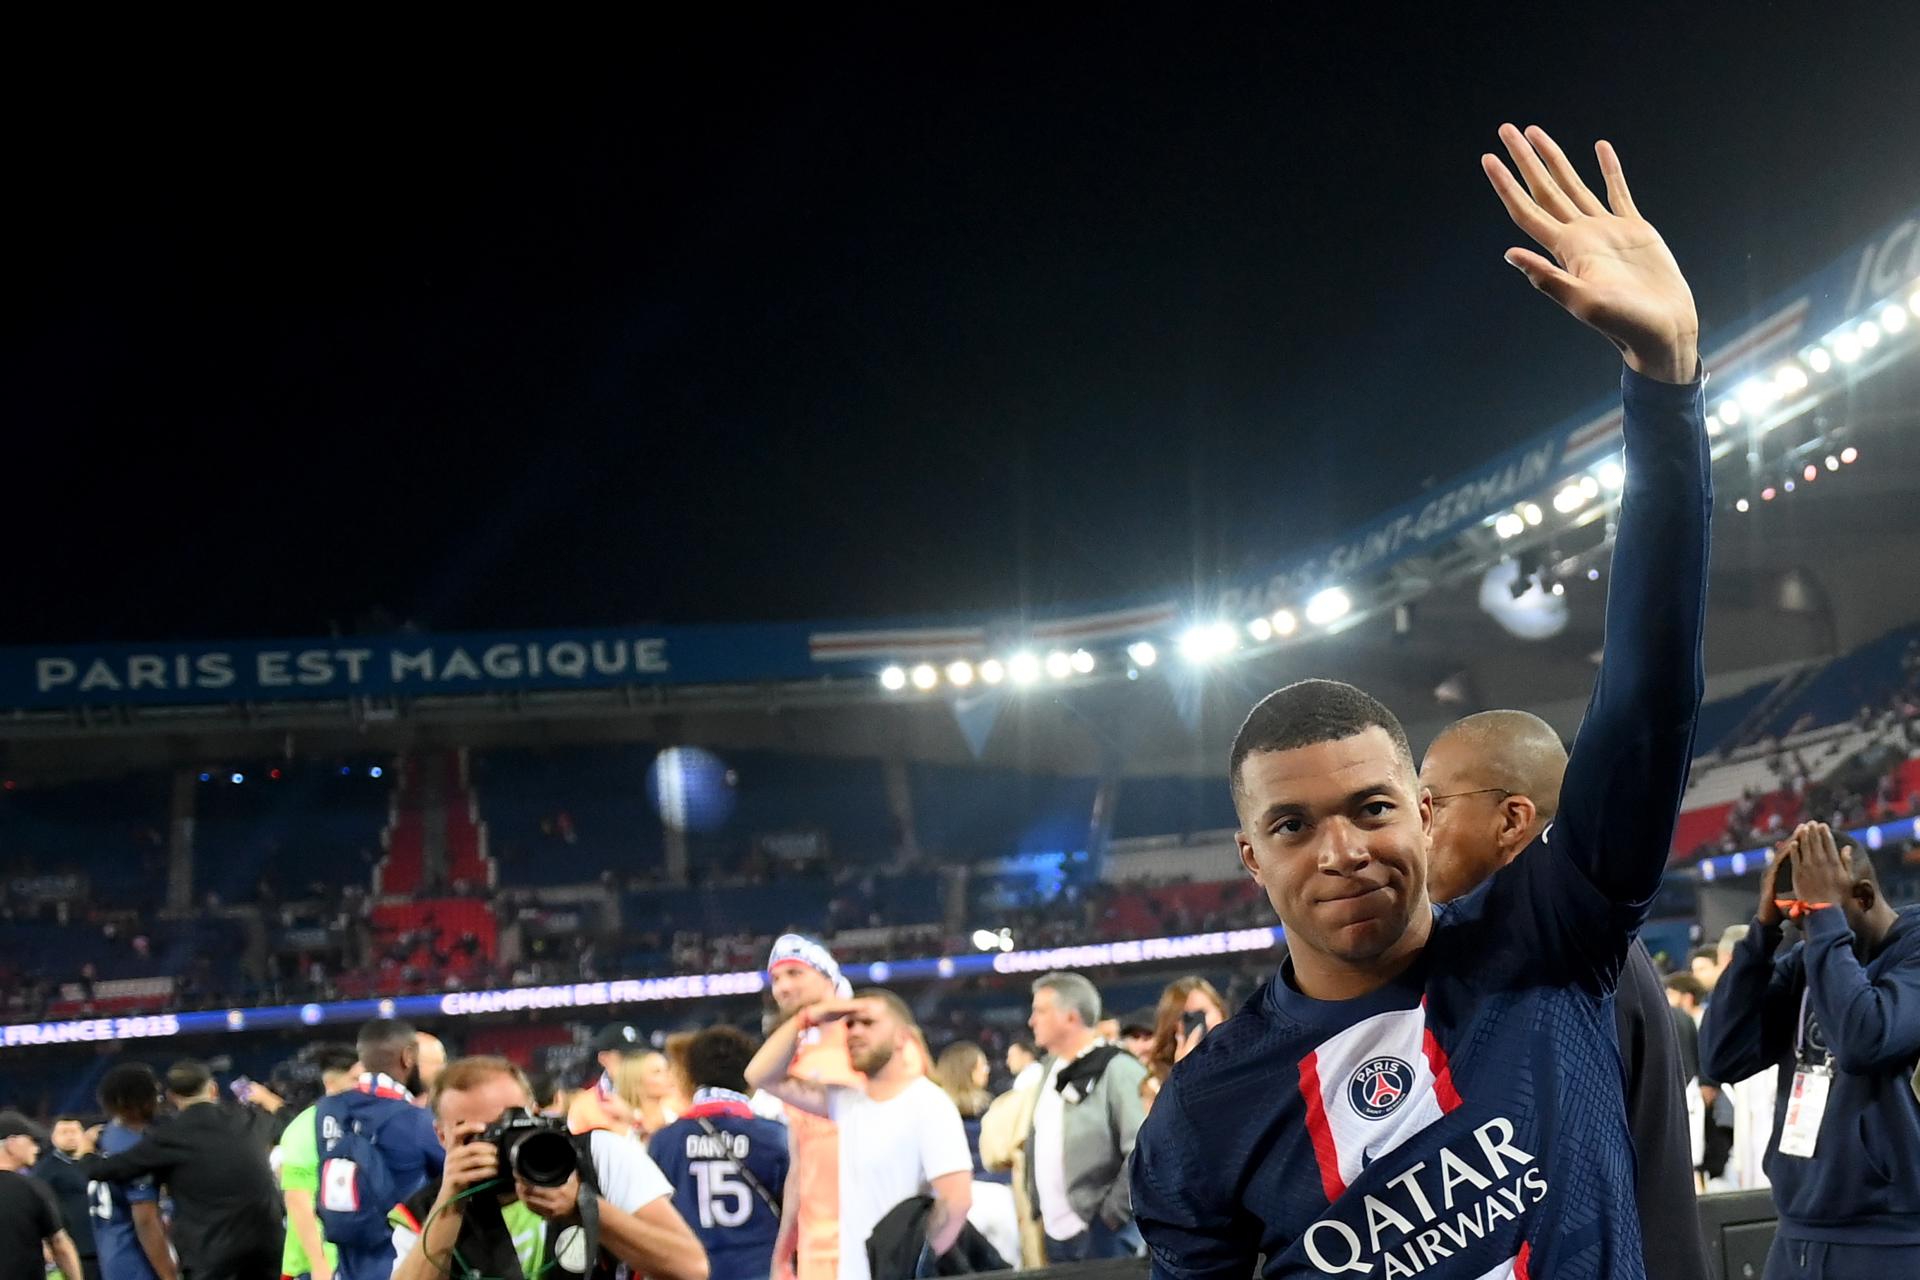 (FILE) Paris Saint-Germain's French forward Kylian Mbappe waves during the 2022-2023 Ligue 1 championship trophy ceremony following the French Ligue 1 soccer match between Paris Saint Germain and Clermont Foot 63 in Paris, France, 03 June 2023. EFE/EPA/FRANCK FIFE / POOL MAXPPP OUT
